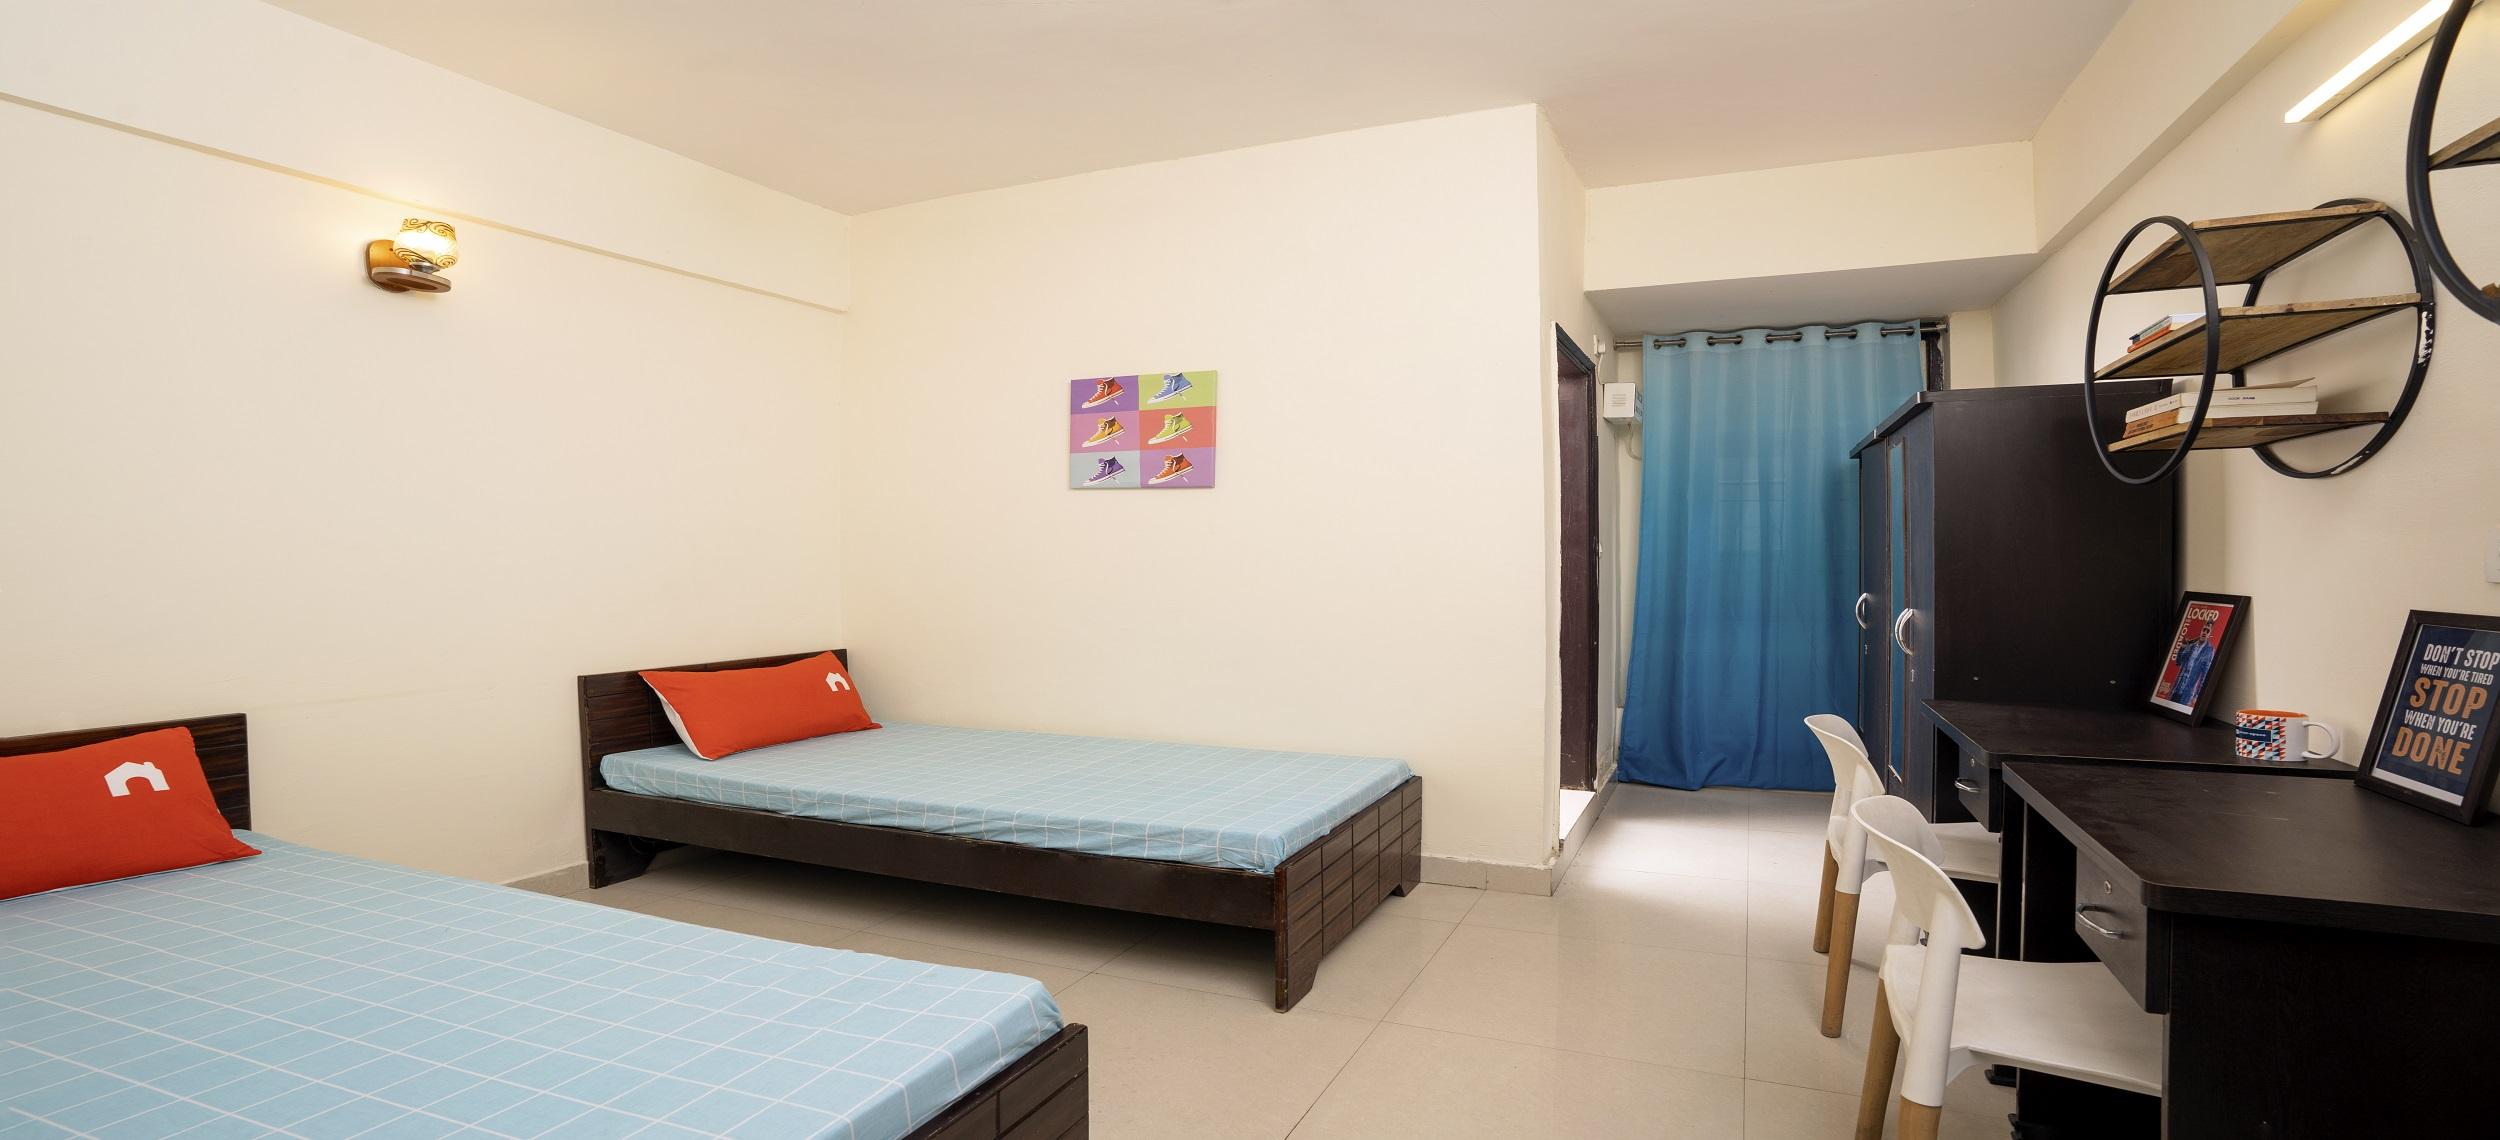 co living space in noida